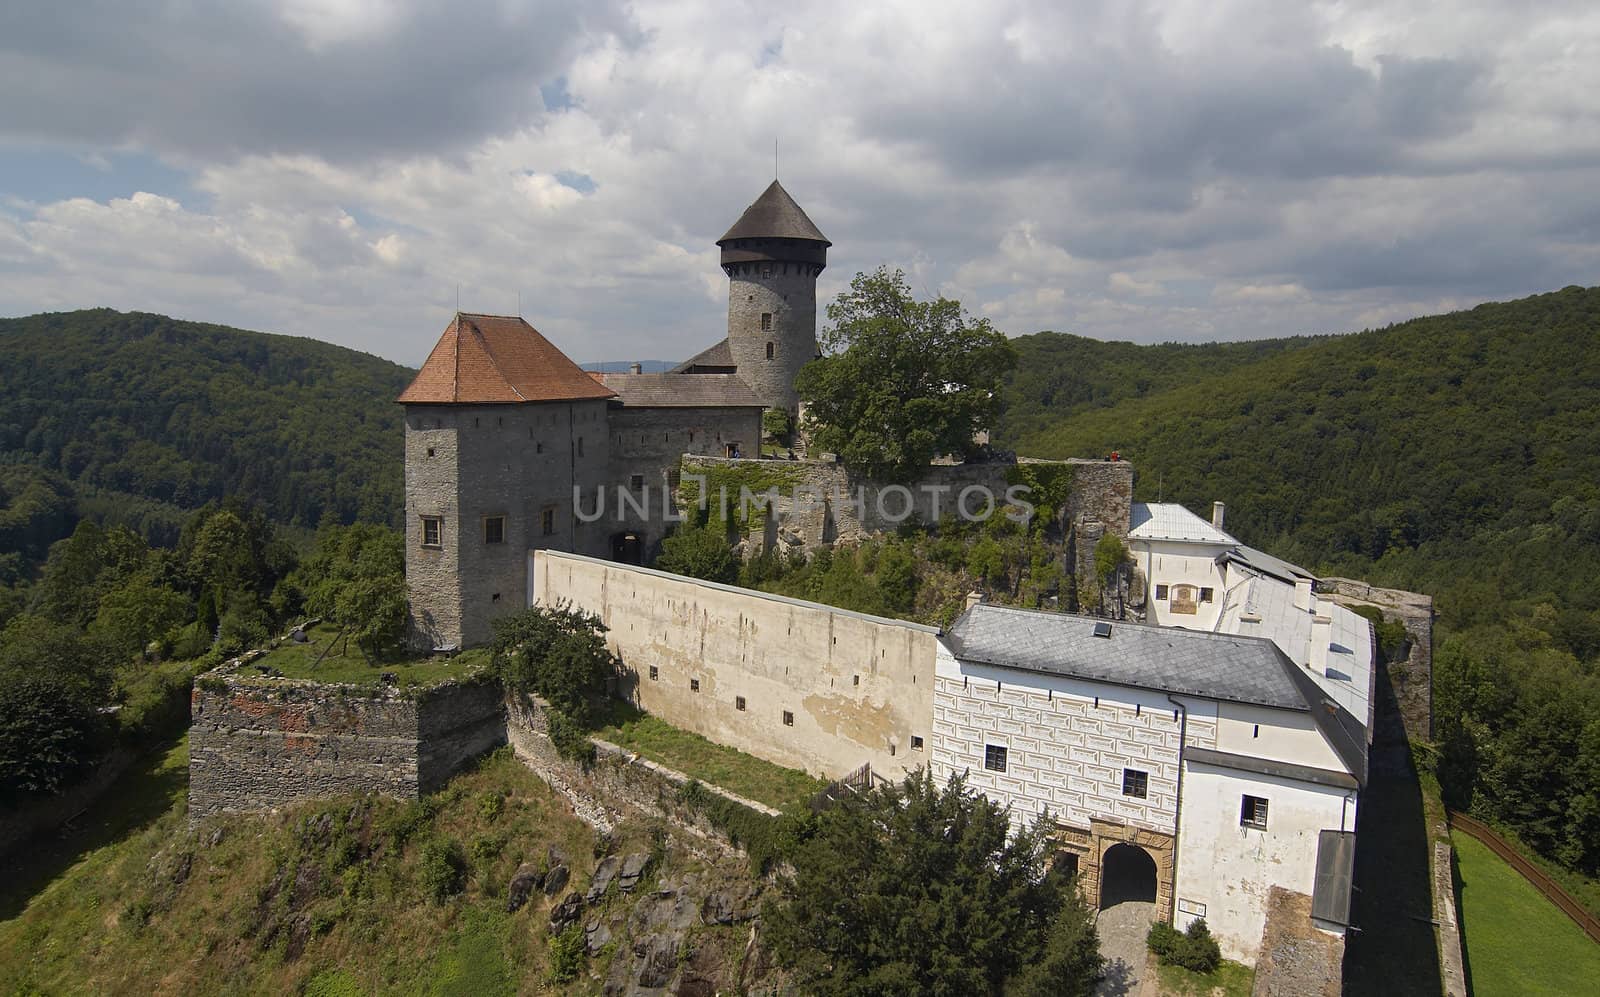 Shot of the castle of the holy order of knights. Czech republic, Europe.